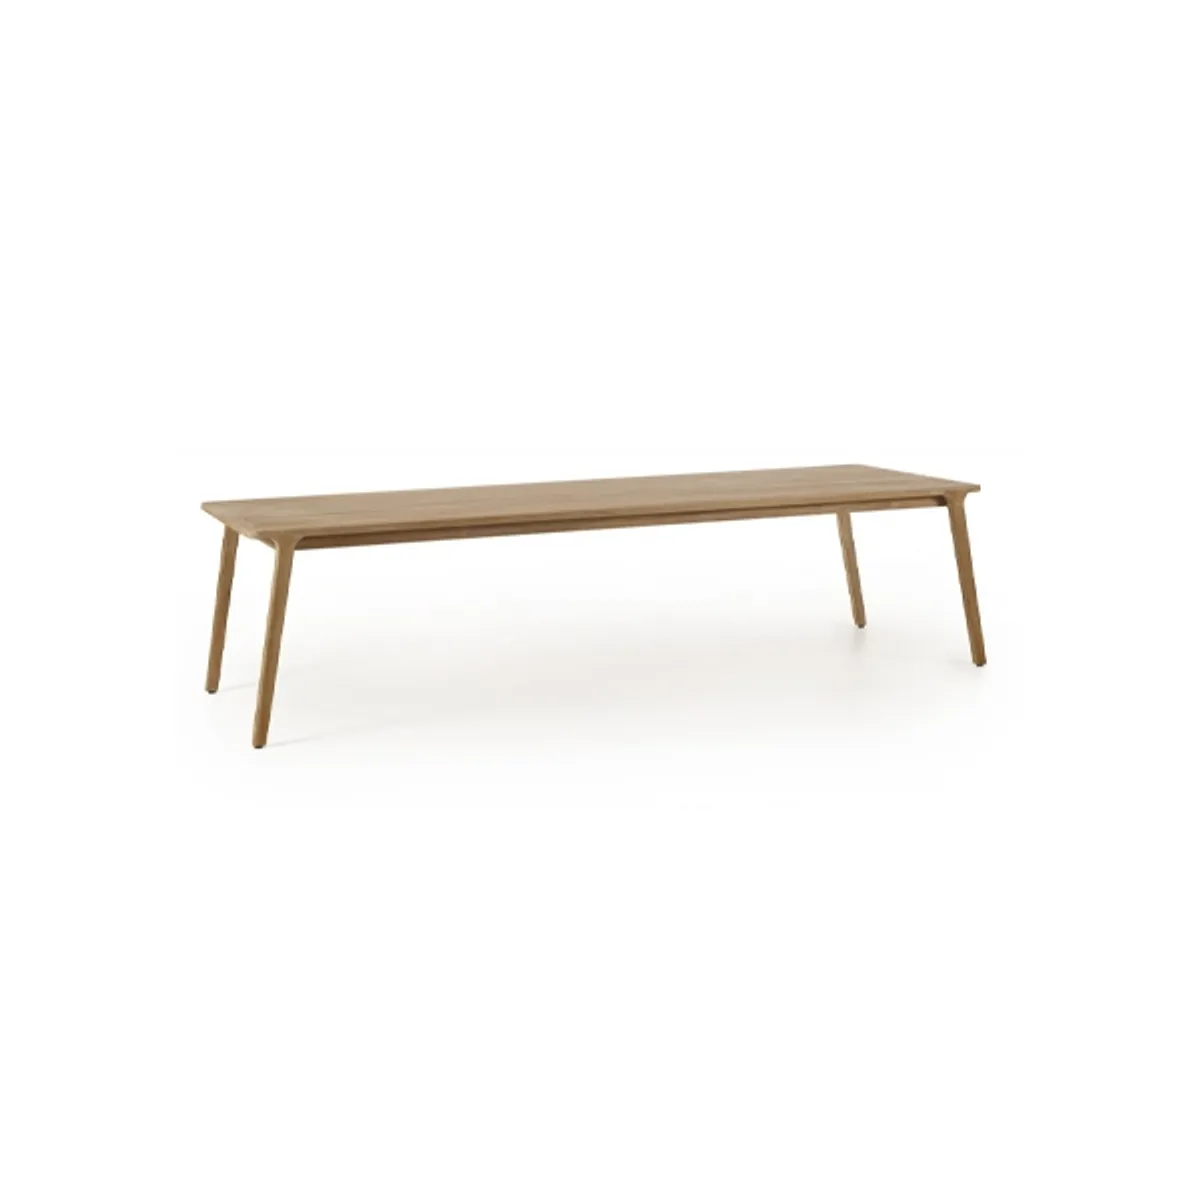 Carnelia large dining table Inside Out Contracts2